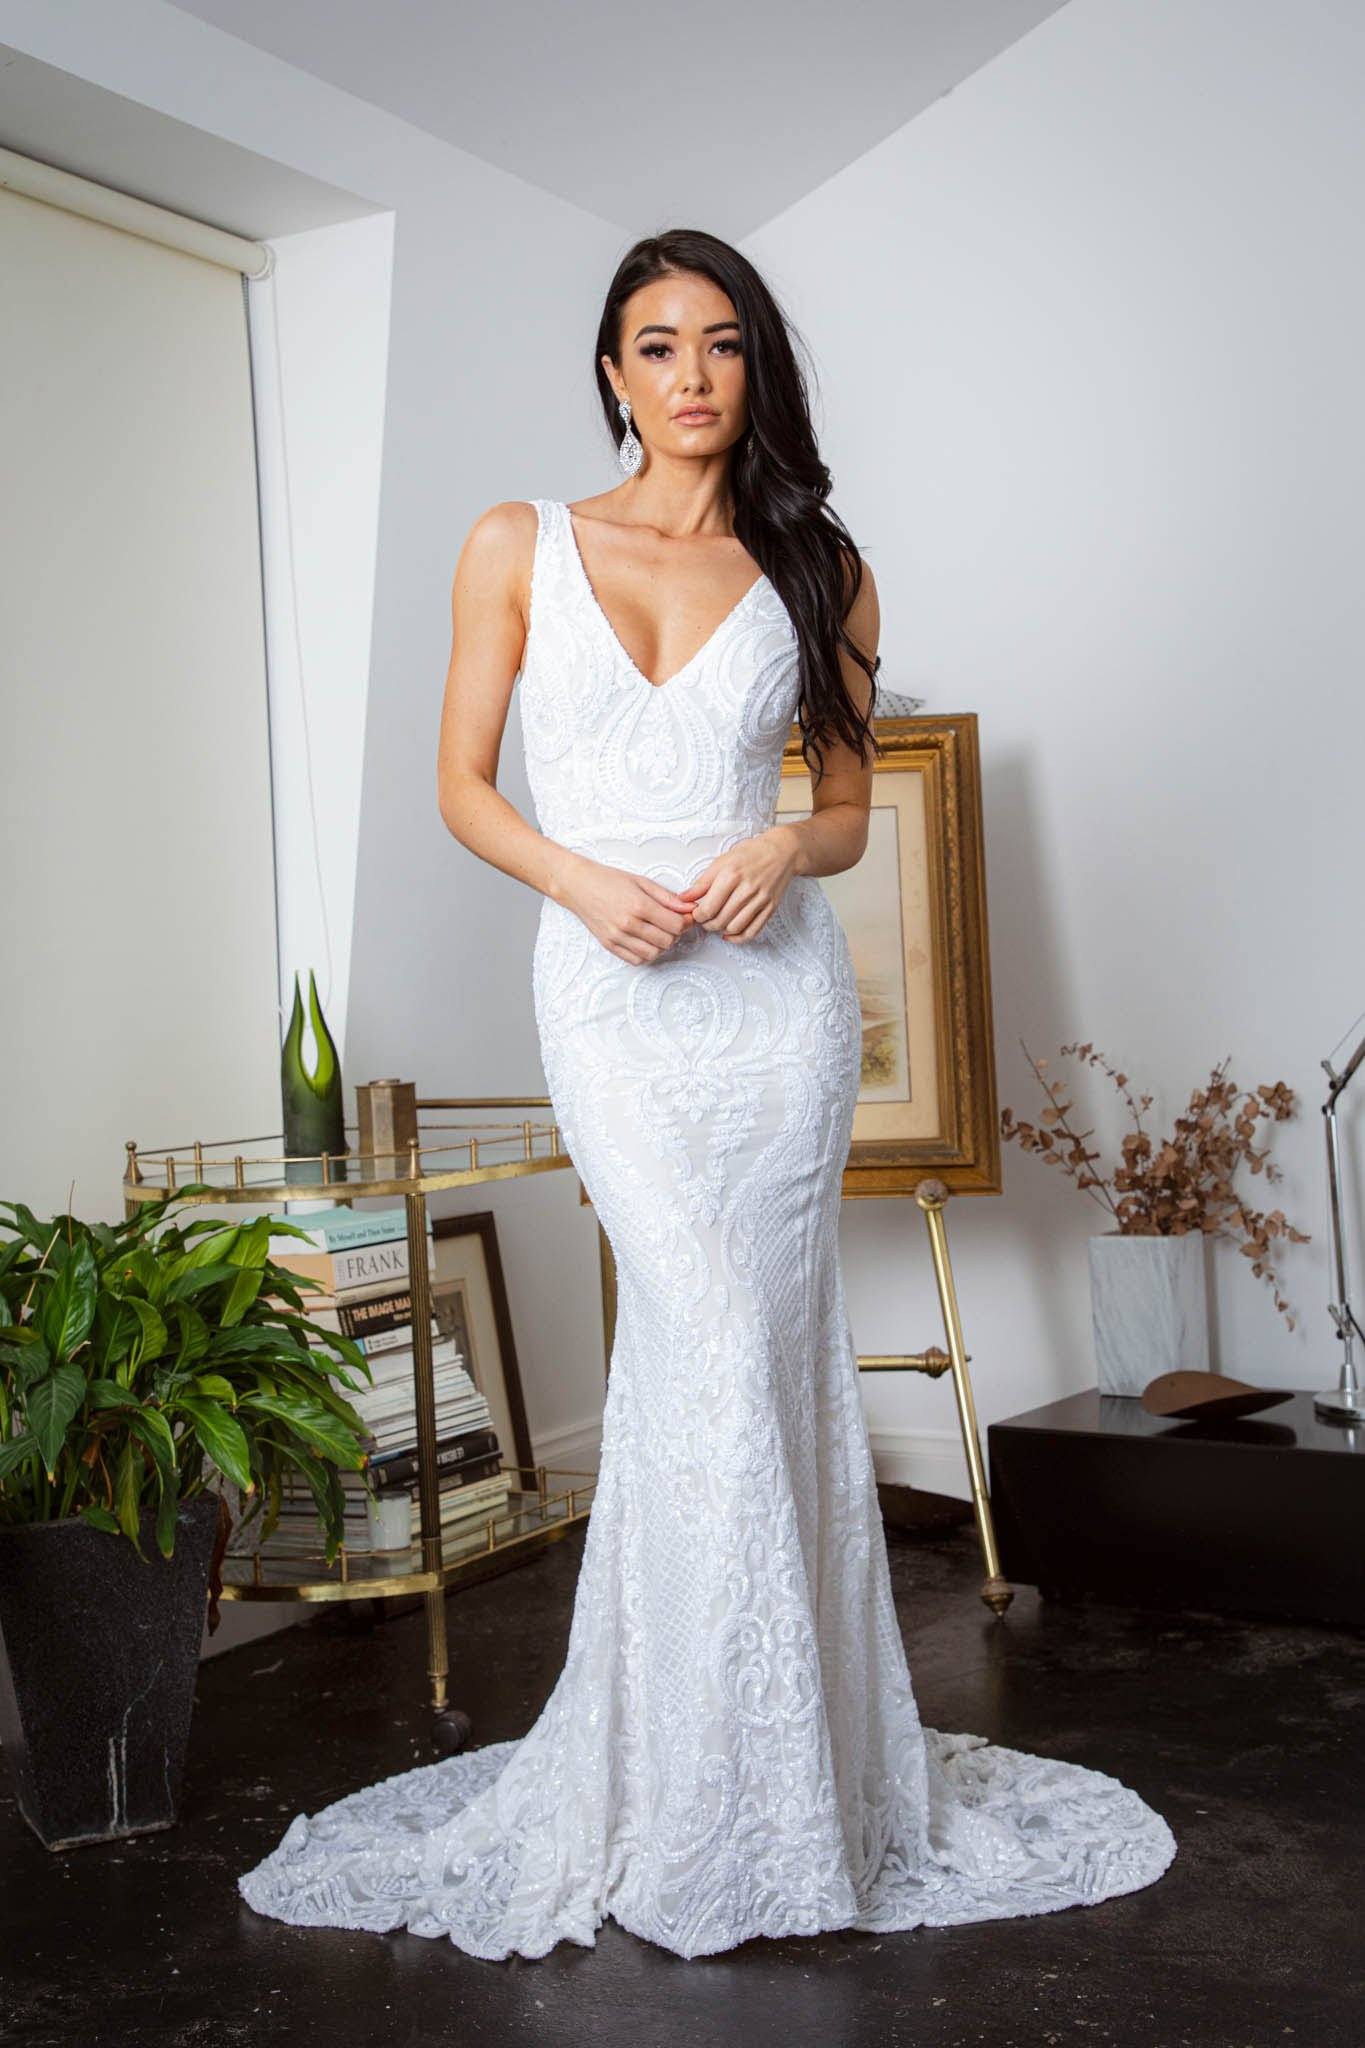 Add a little bit of Spice with the Gowns that comes with the Most | Elysee